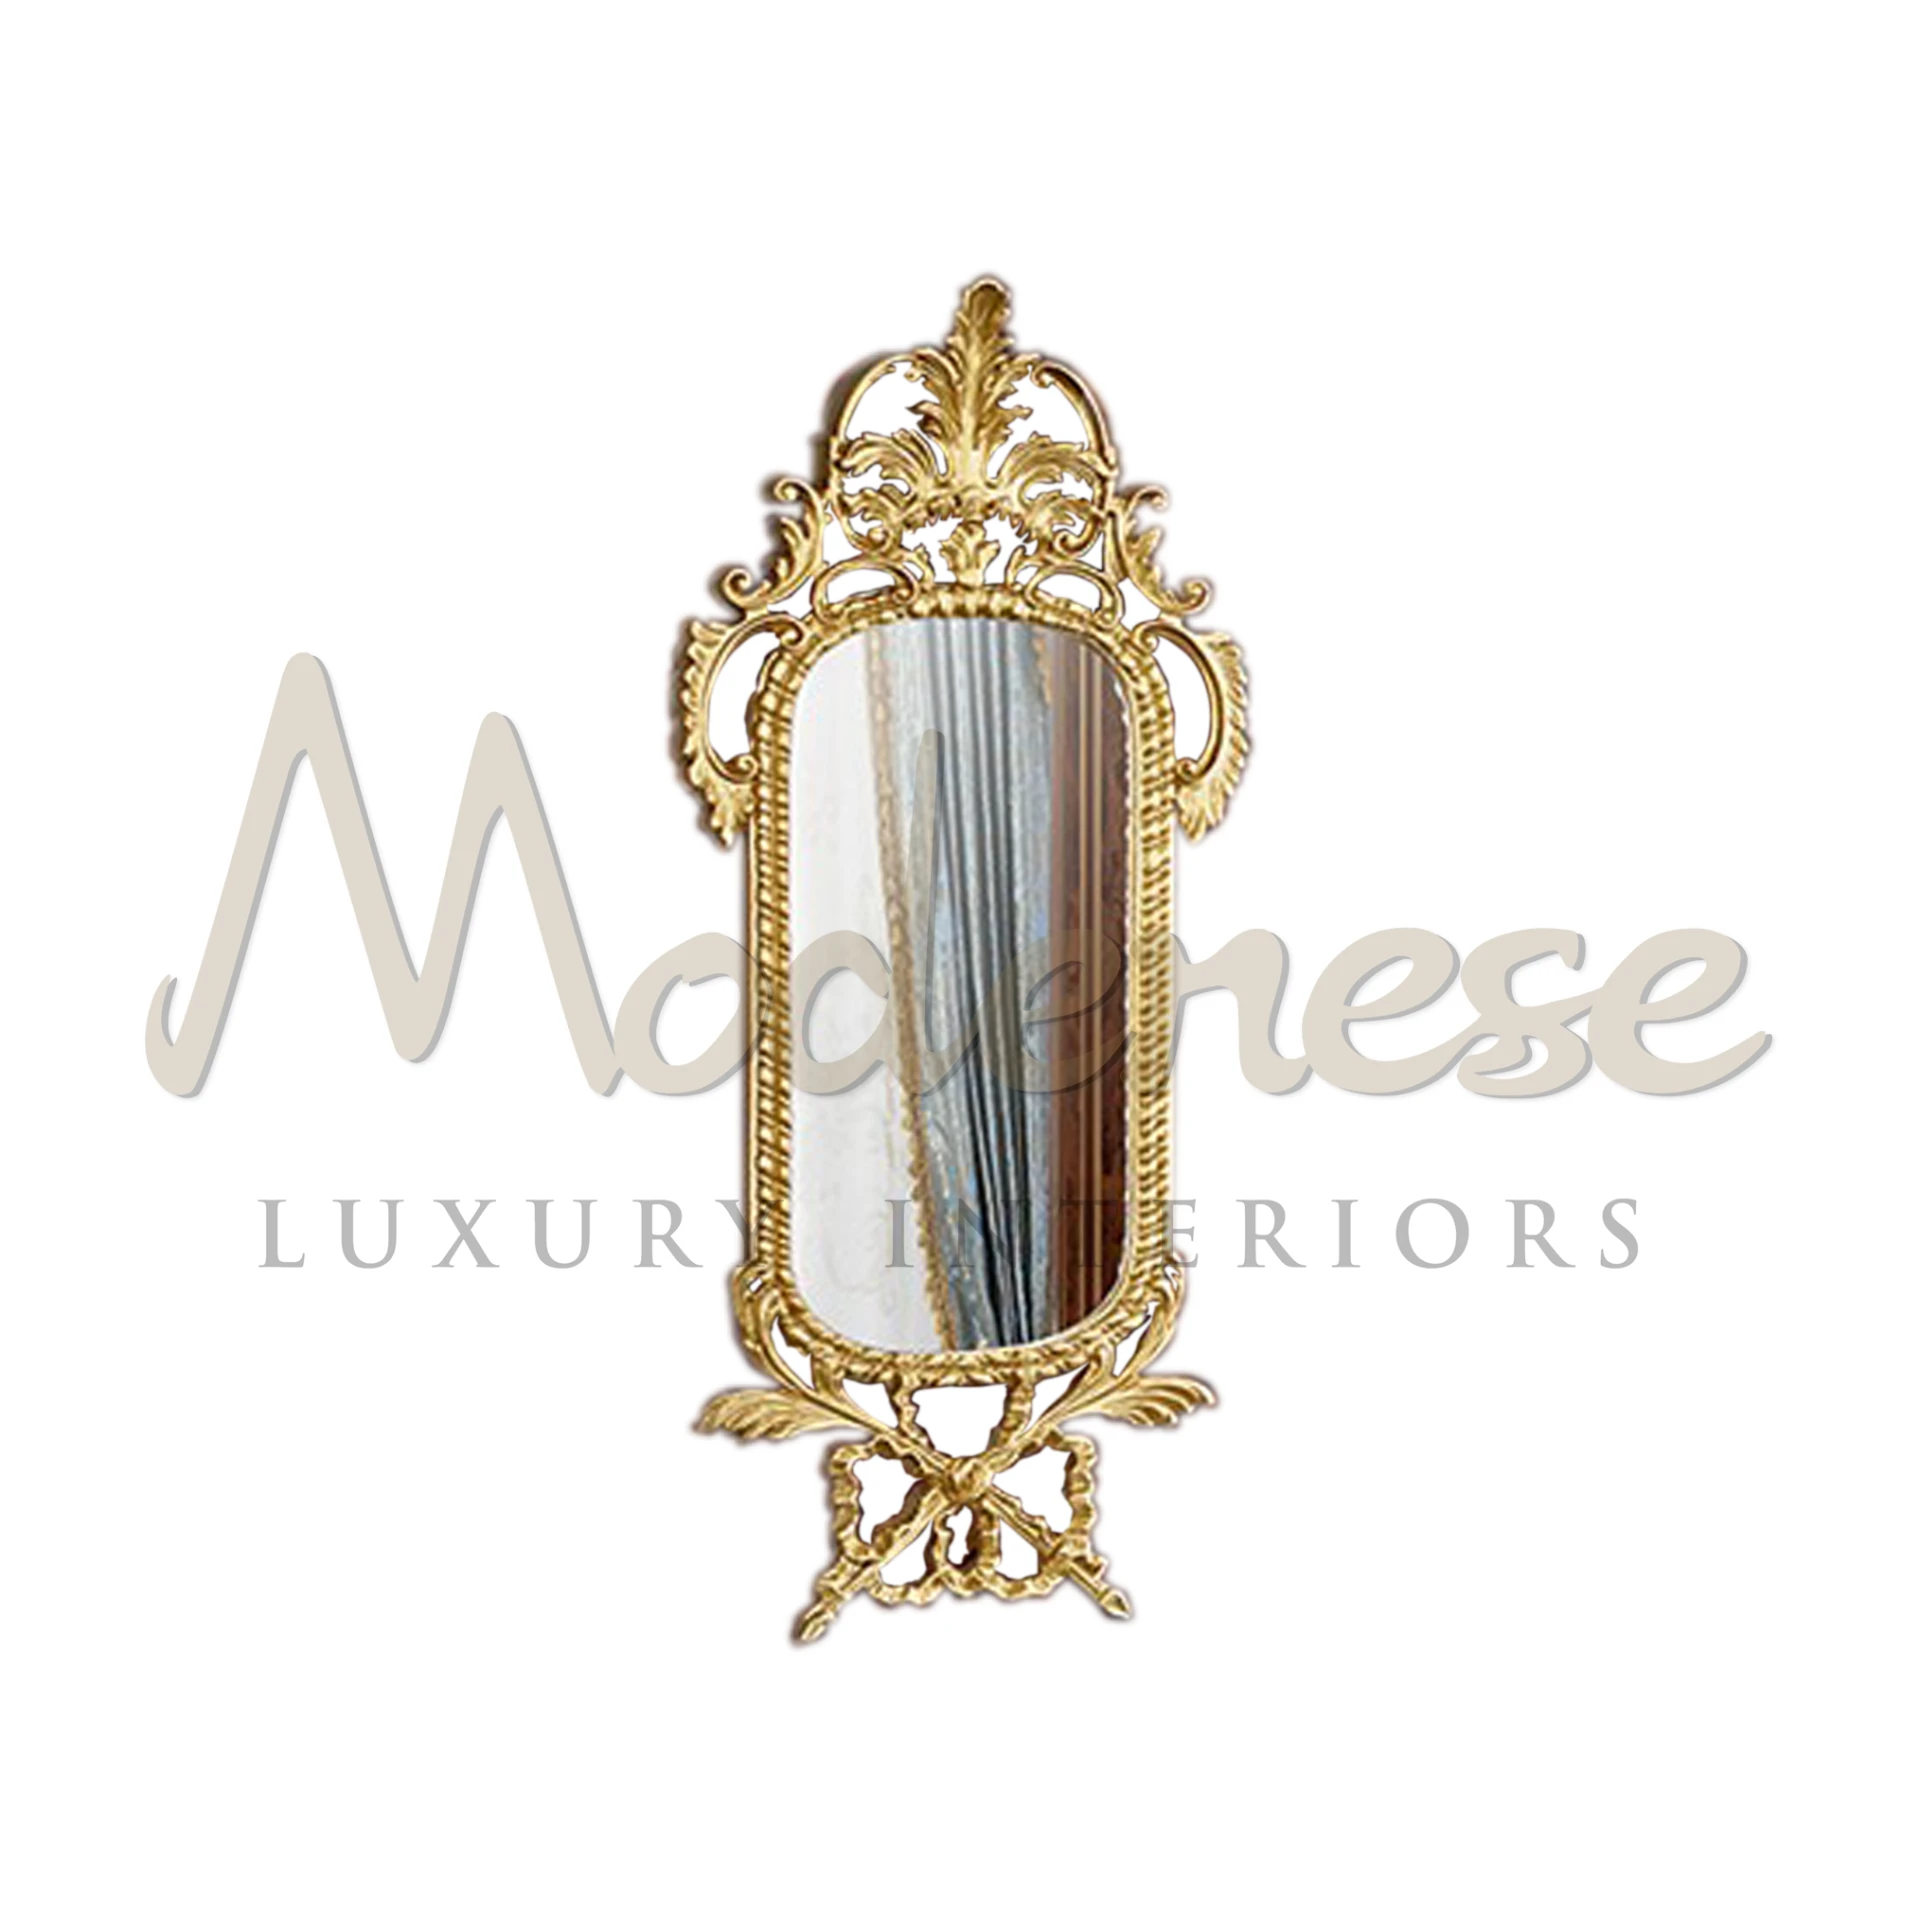 Bespoke Classic Mirror with sleek gold finish, a symbol of Modenese luxury interiors, perfect for sophisticated design.